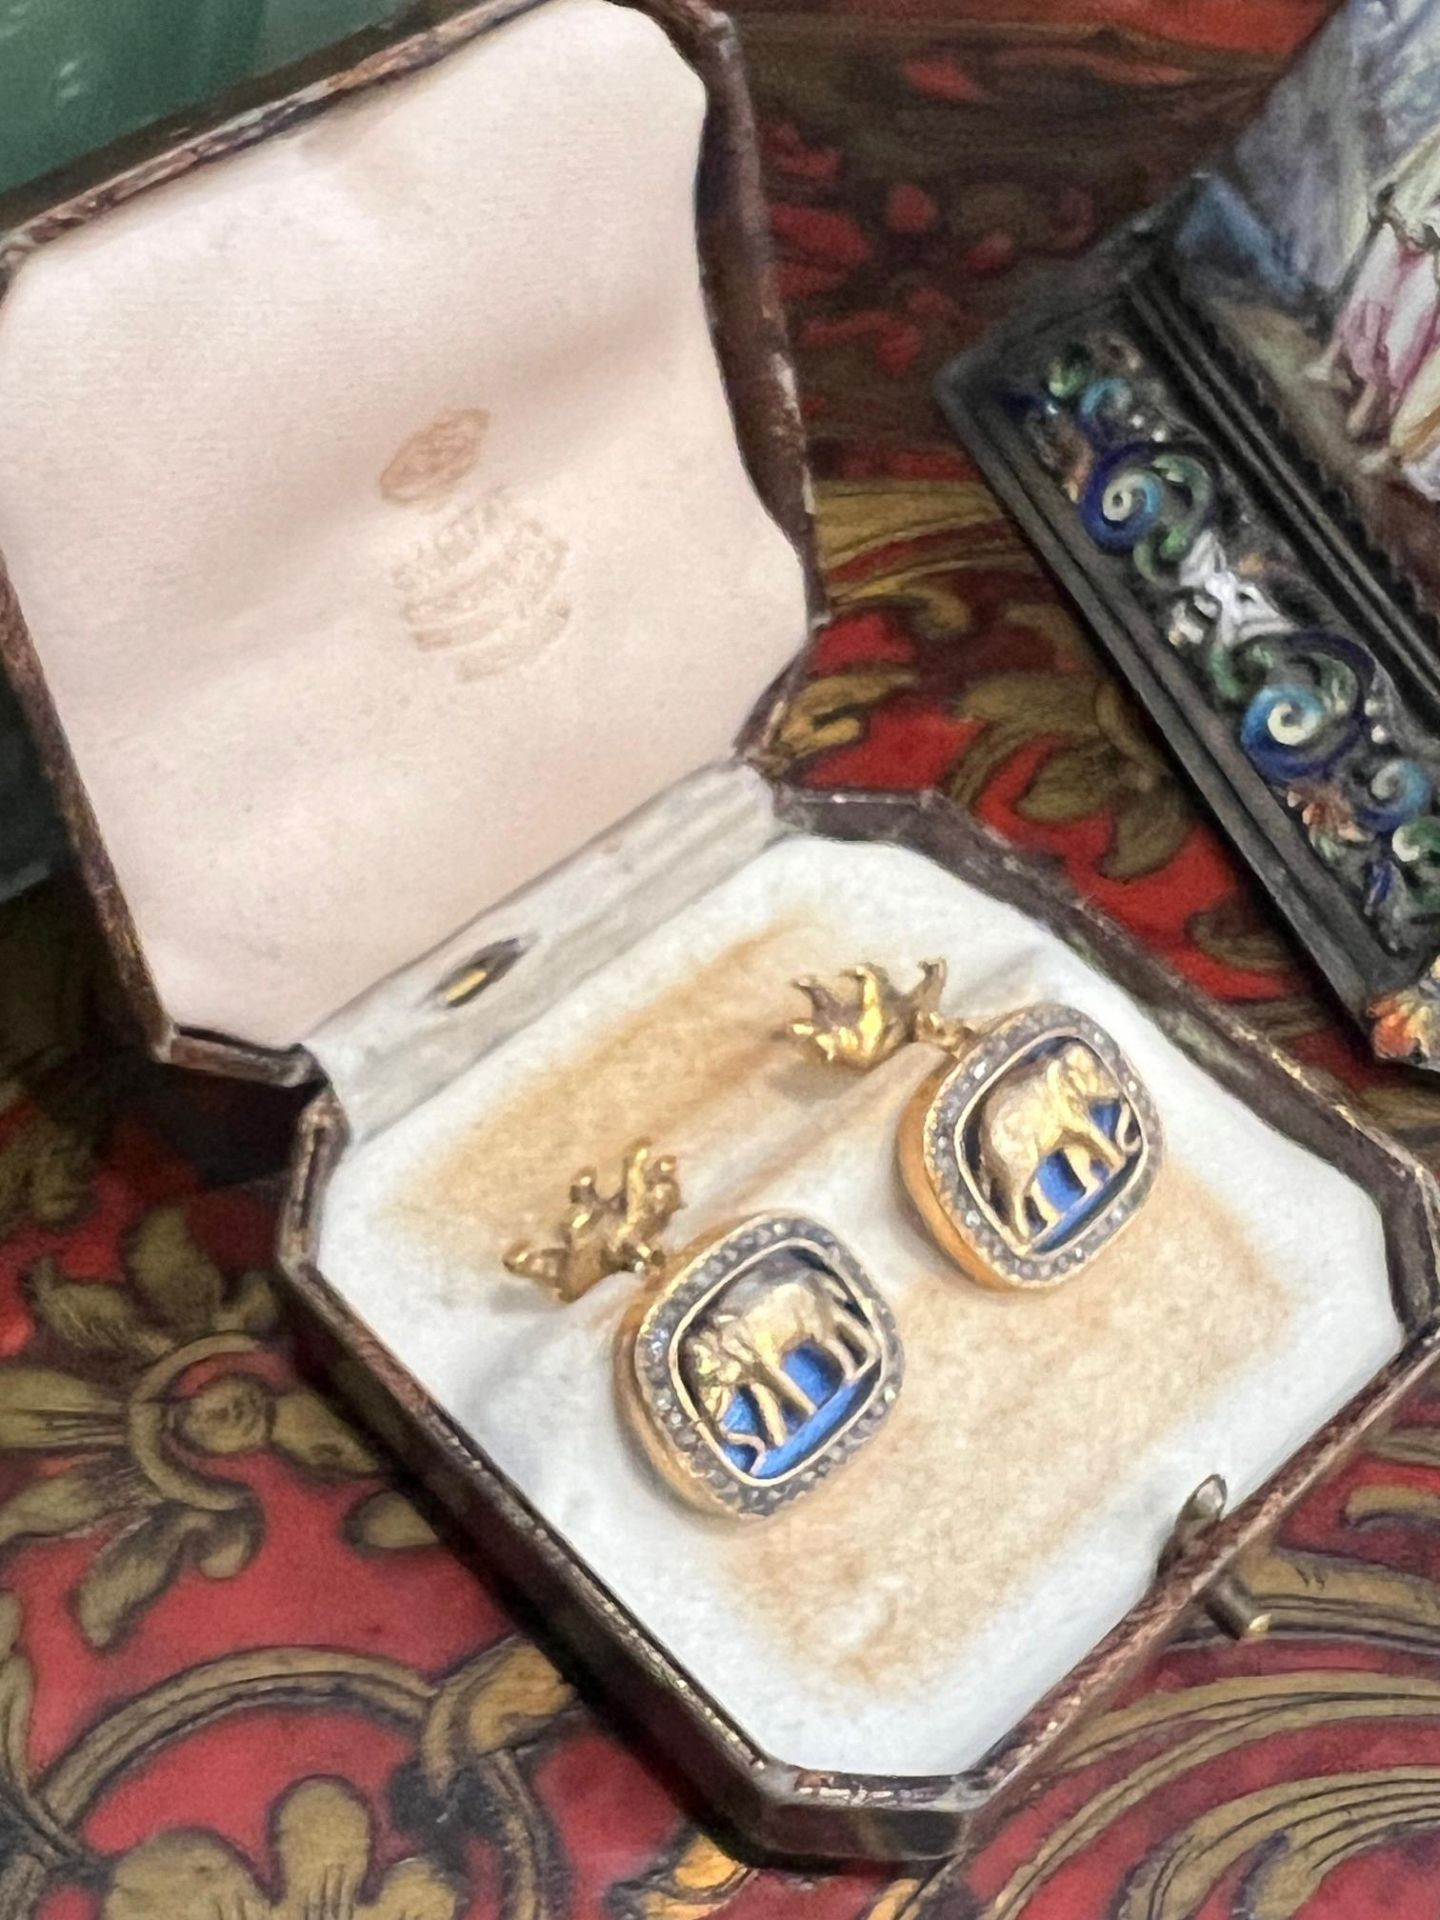 A PAIR OF FABERGE STYLE DIAMOND ENCRUSTED, SILVER GILT AND ENAMELLED CUFFLINKS - Image 10 of 13